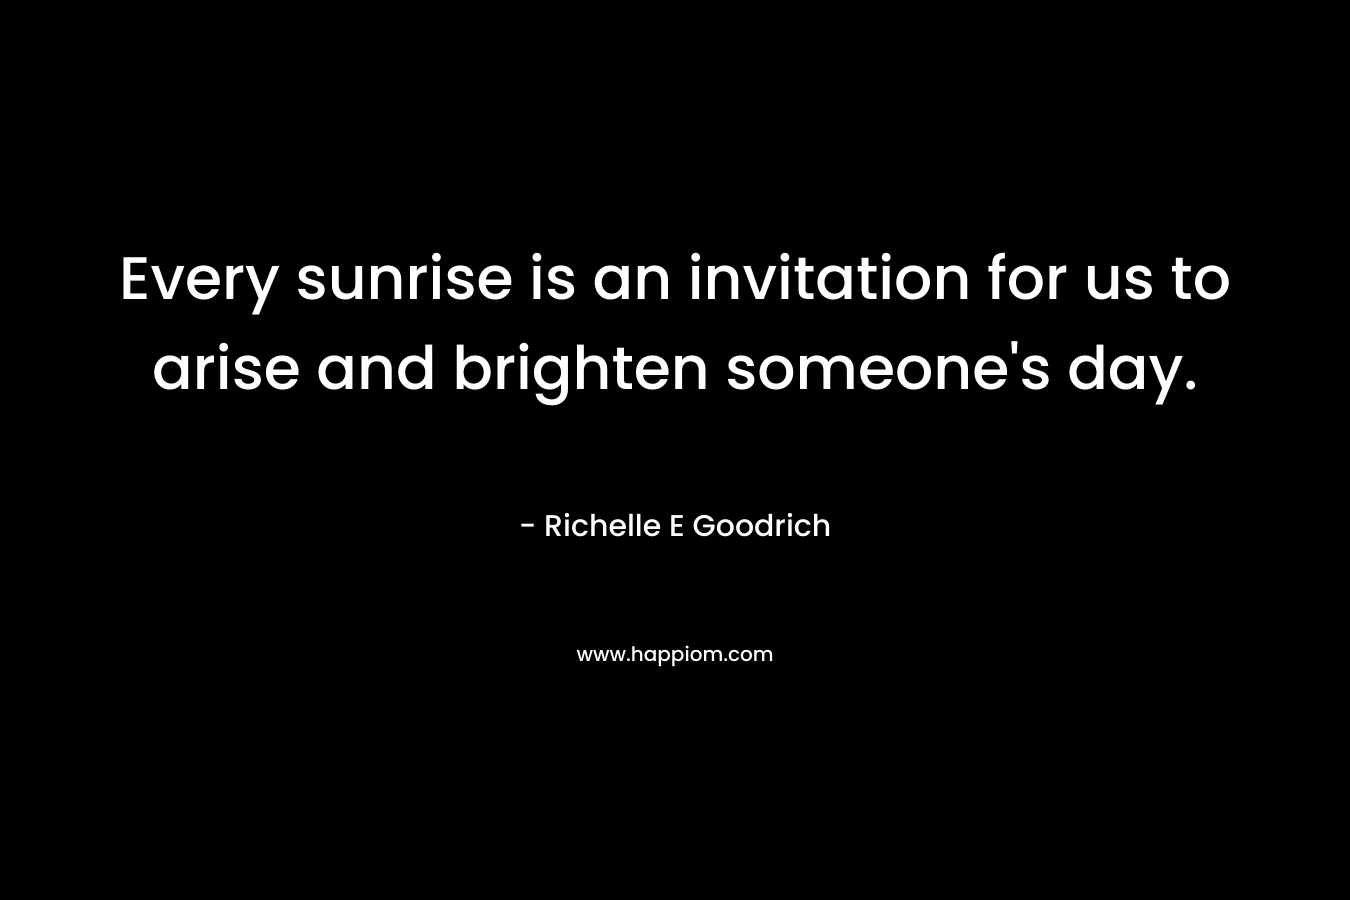 Every sunrise is an invitation for us to arise and brighten someone's day.